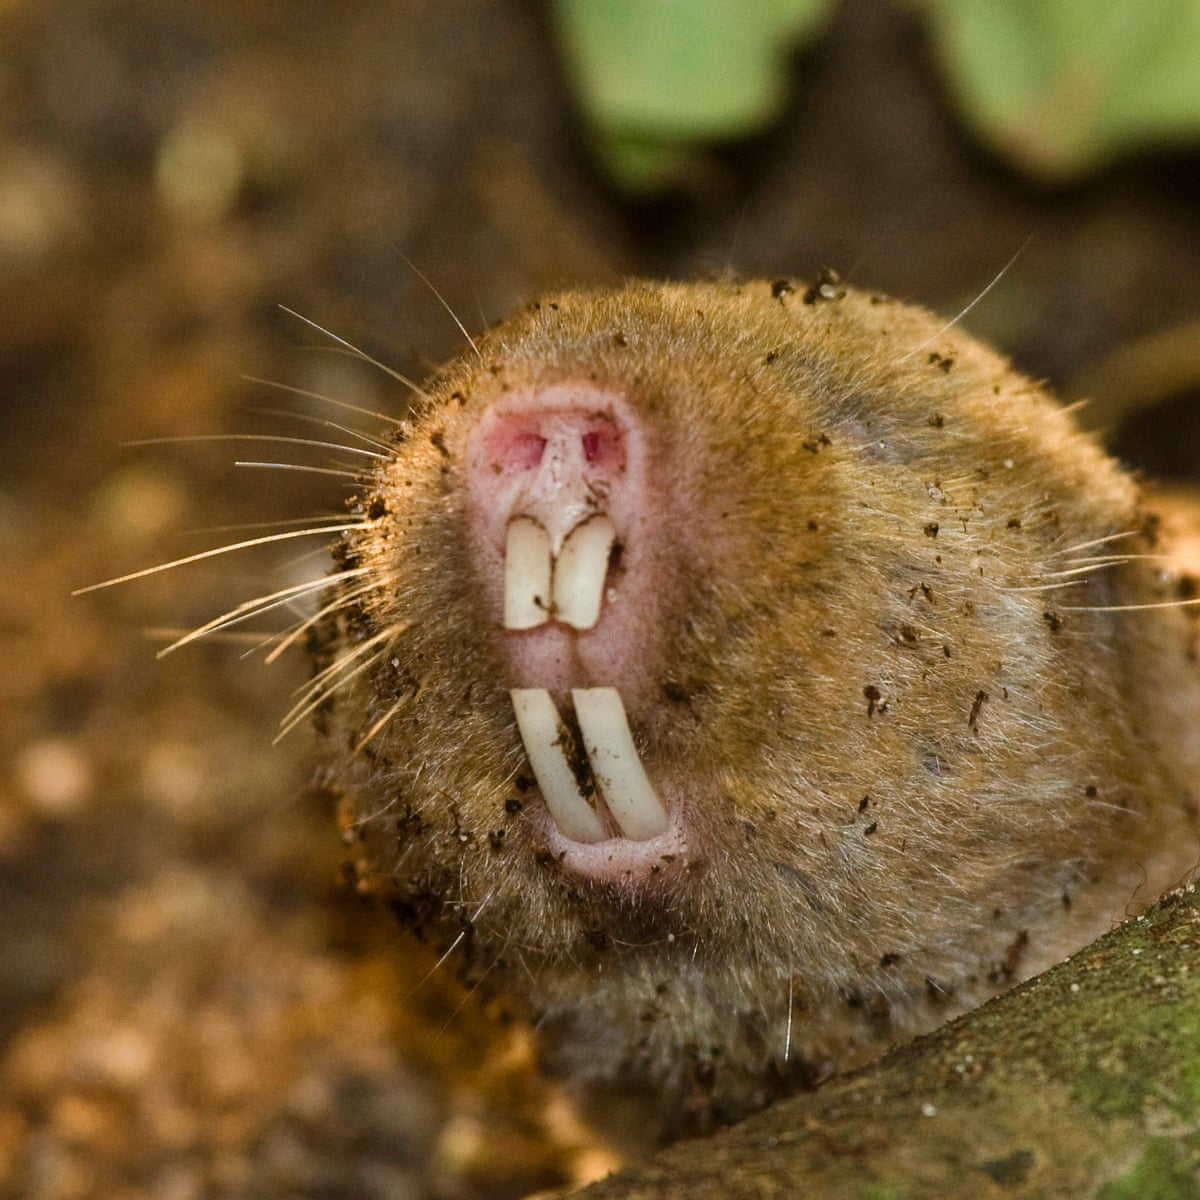 Near-blind Ansell's mole-rats detect magnetic cues with eyes, study shows |  Animals | The Guardian